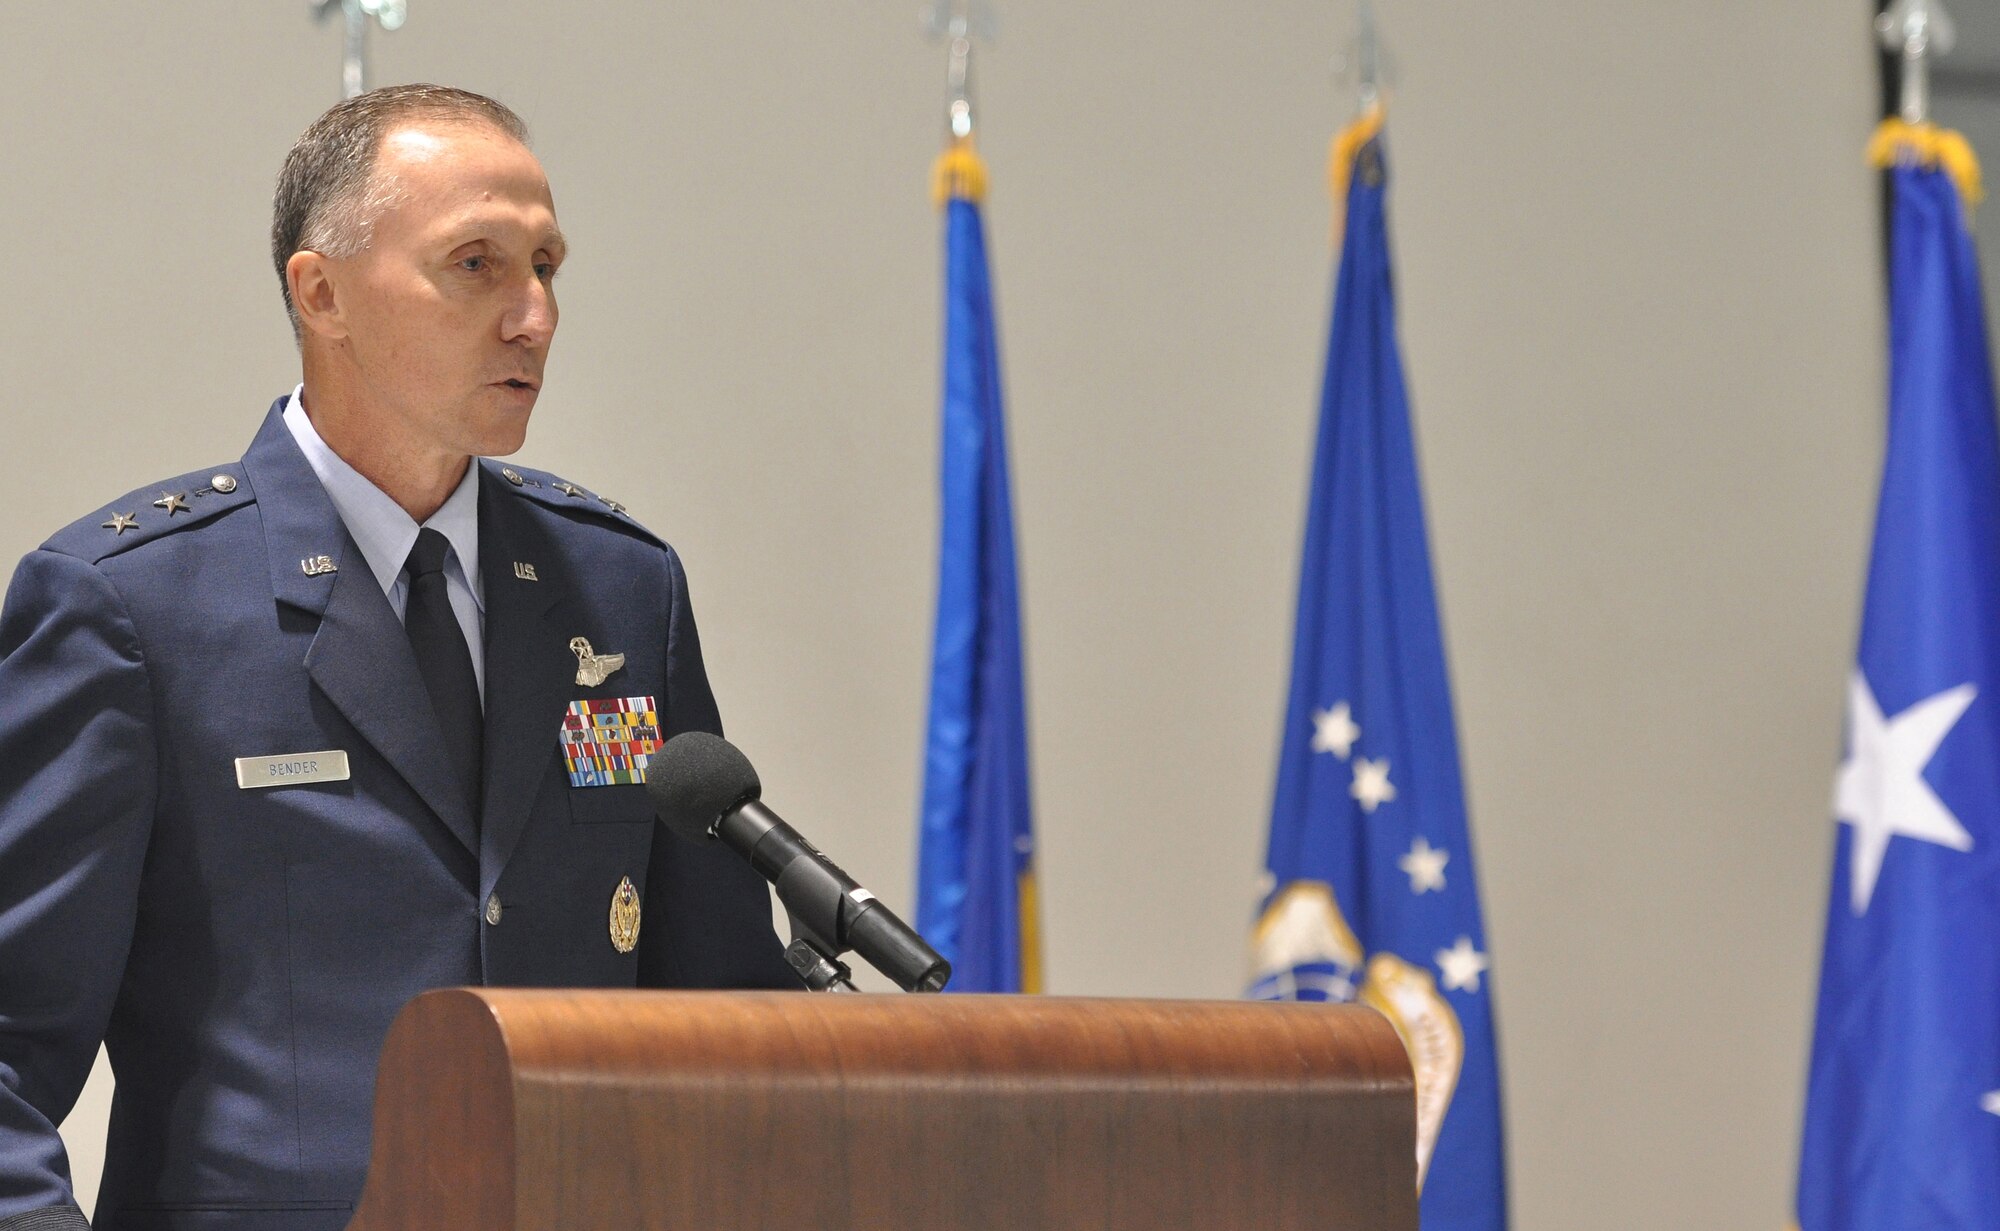 Maj. Gen. William Bender, U.S. Air Force Expeditionary Center commander, provides remarks as the presiding official during the inactivation ceremony for the 615th Contingency Response Wing, May 29, 2012, at Travis Air Force Base, Calif. The 615 CRW ceased its operations as a sister wing, ending seven years of mobility excellence. The inactivation ceremony also included the transfer of command of the two contingency response groups and one contingency operations group to the 621st Contingency Response Wing, headquartered at Joint Base McGuire-Dix-Lakehurst, N.J. (U.S. Air Force Photo / Master Sgt. Stan Parker)